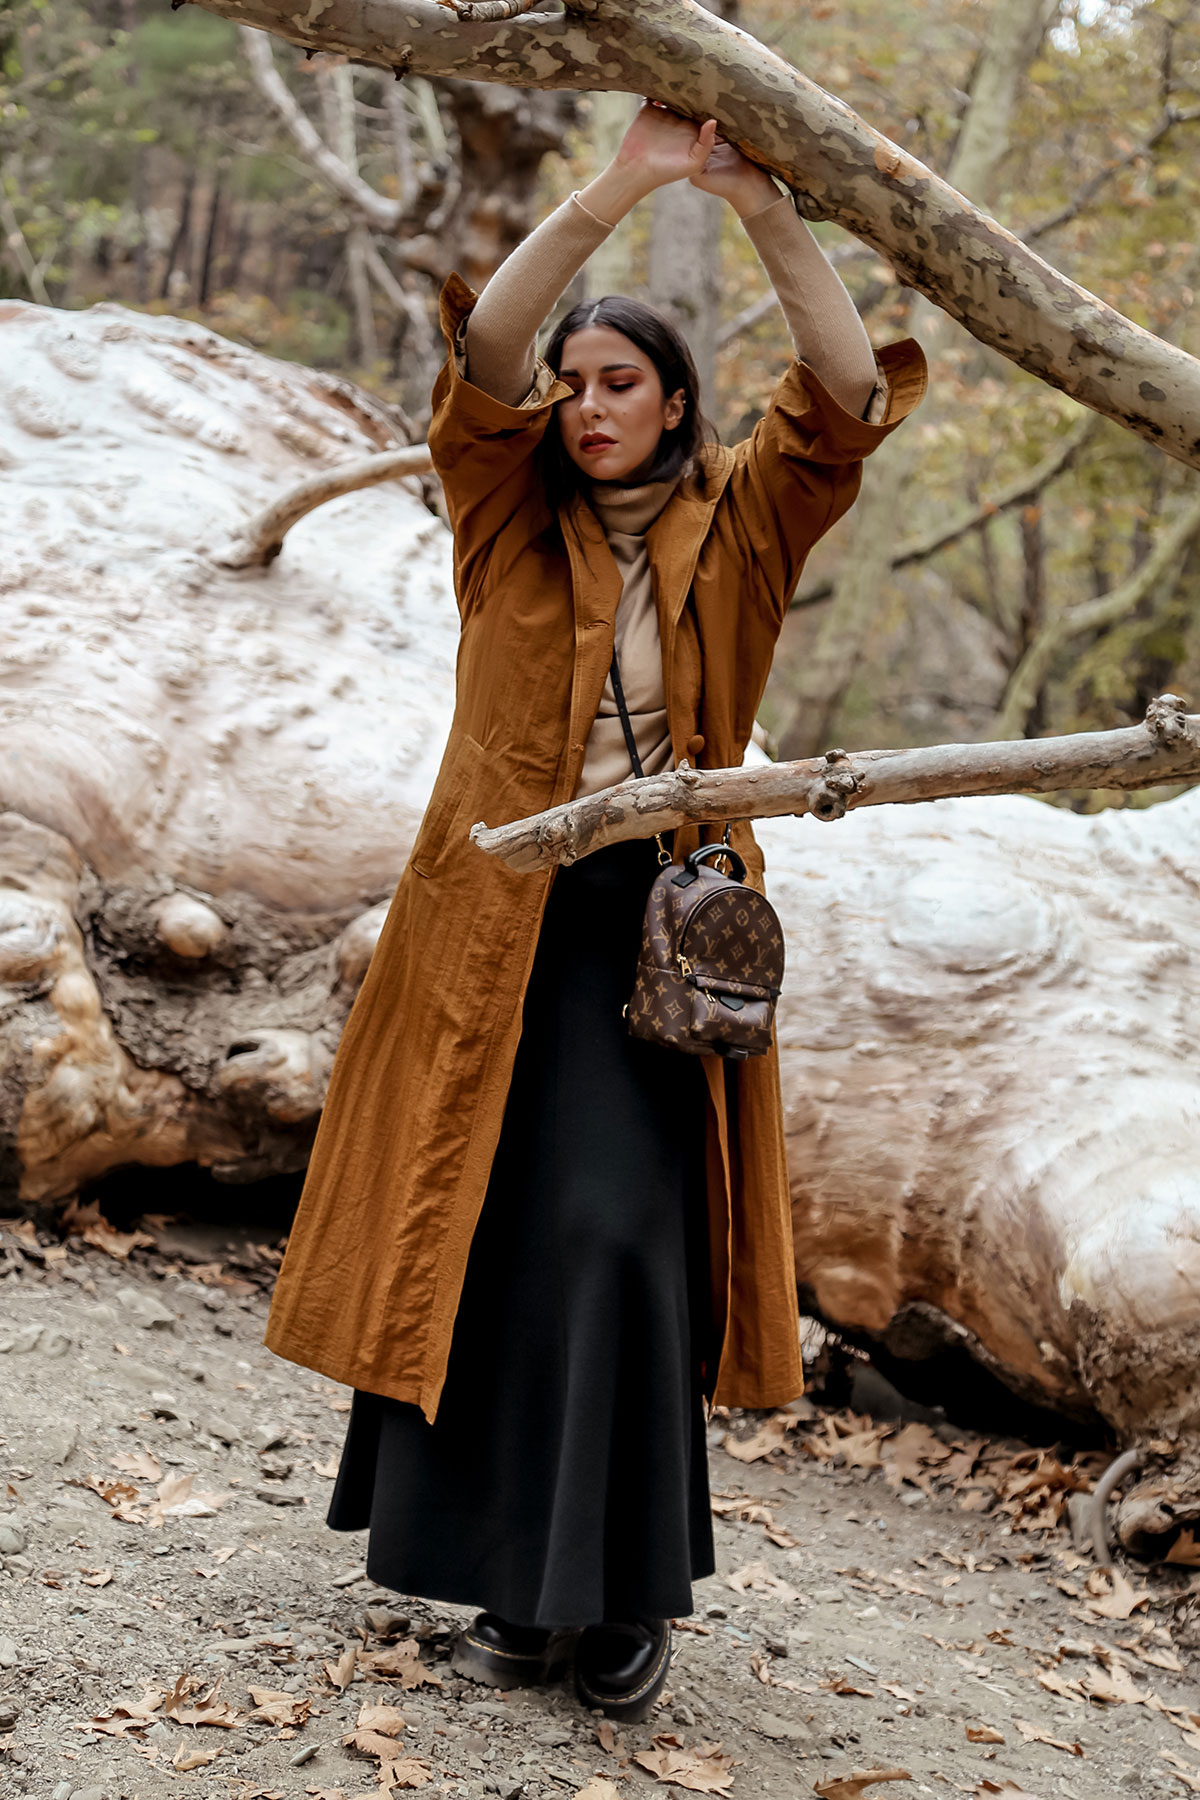 Trench coat and other favourite fall wardrobe staples by Stella Asteria - wearing turtleneck sweater with knit skirt and Dr Martens boots, vintage trench coat